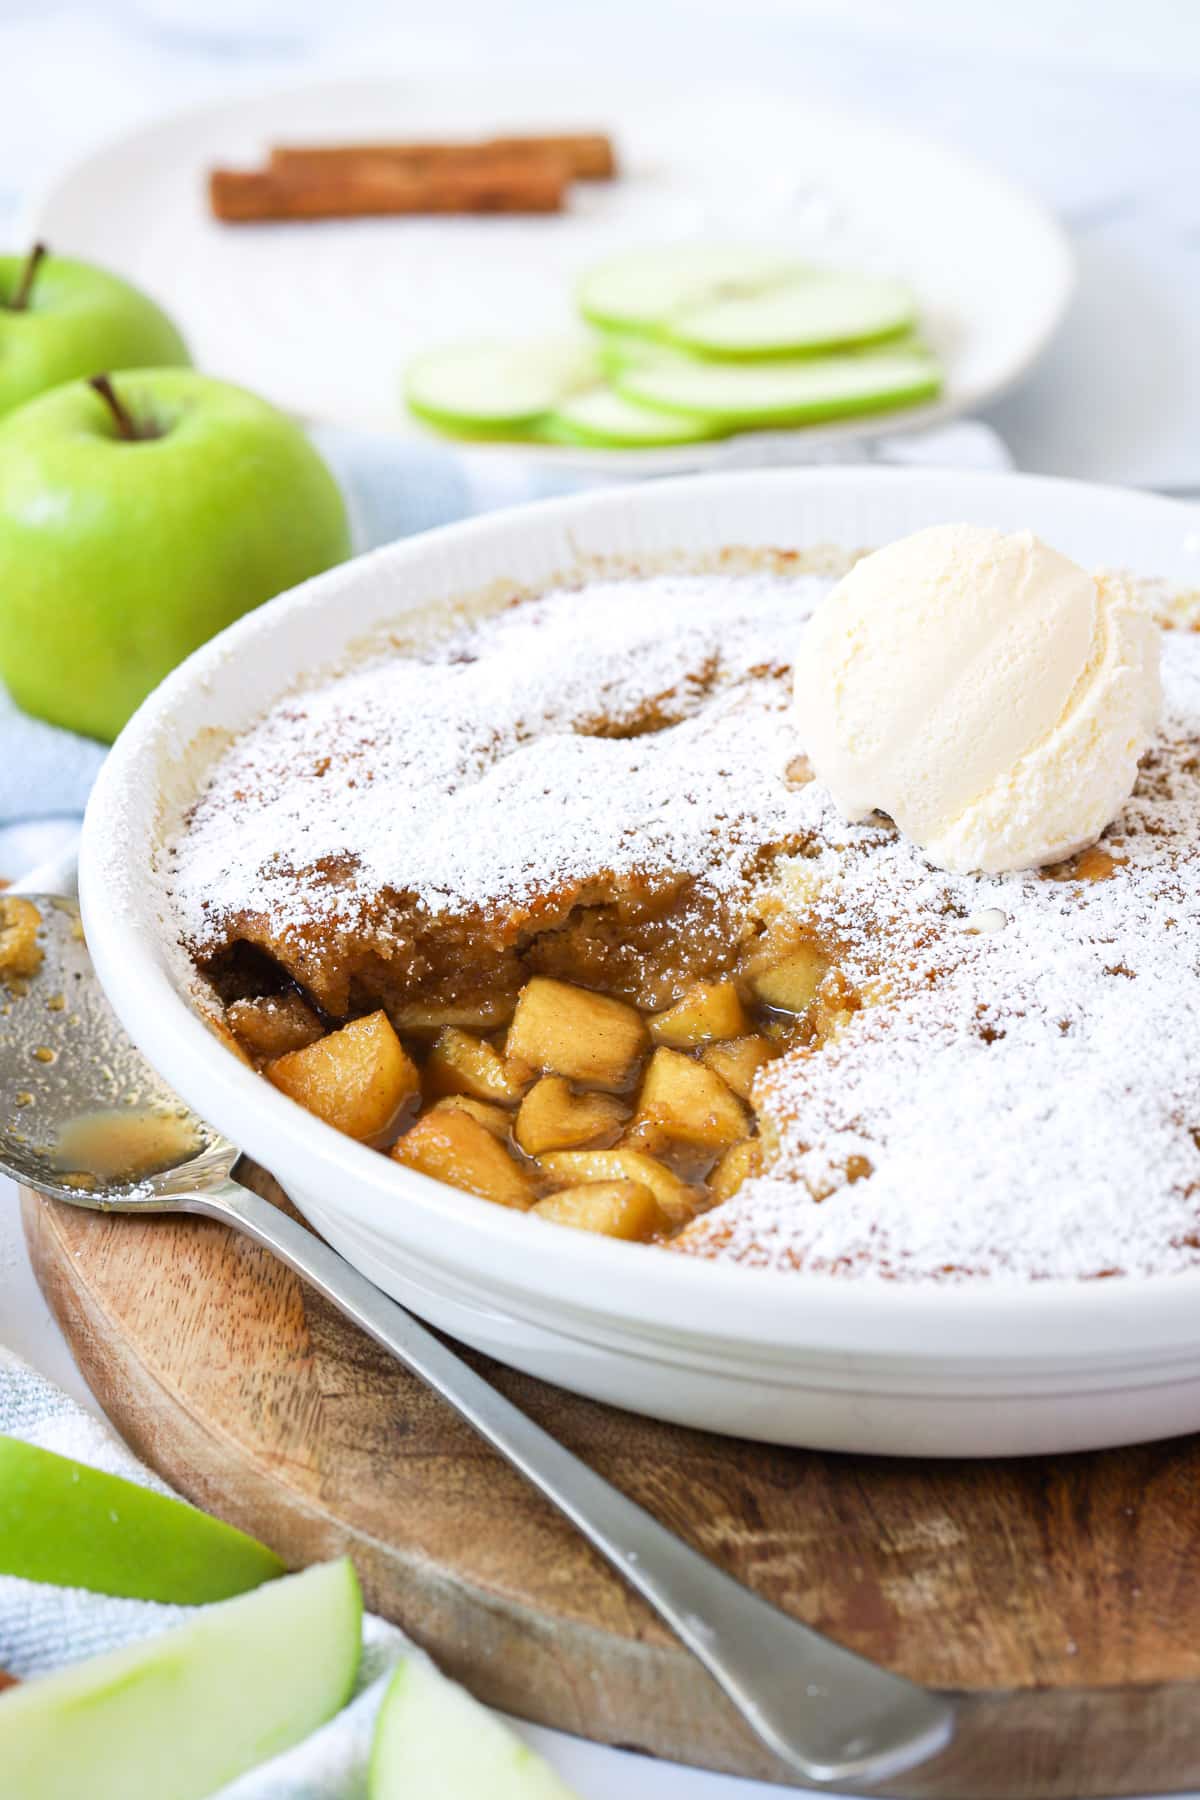 a sponge pudding in a white dish with cooked apples and ice cream